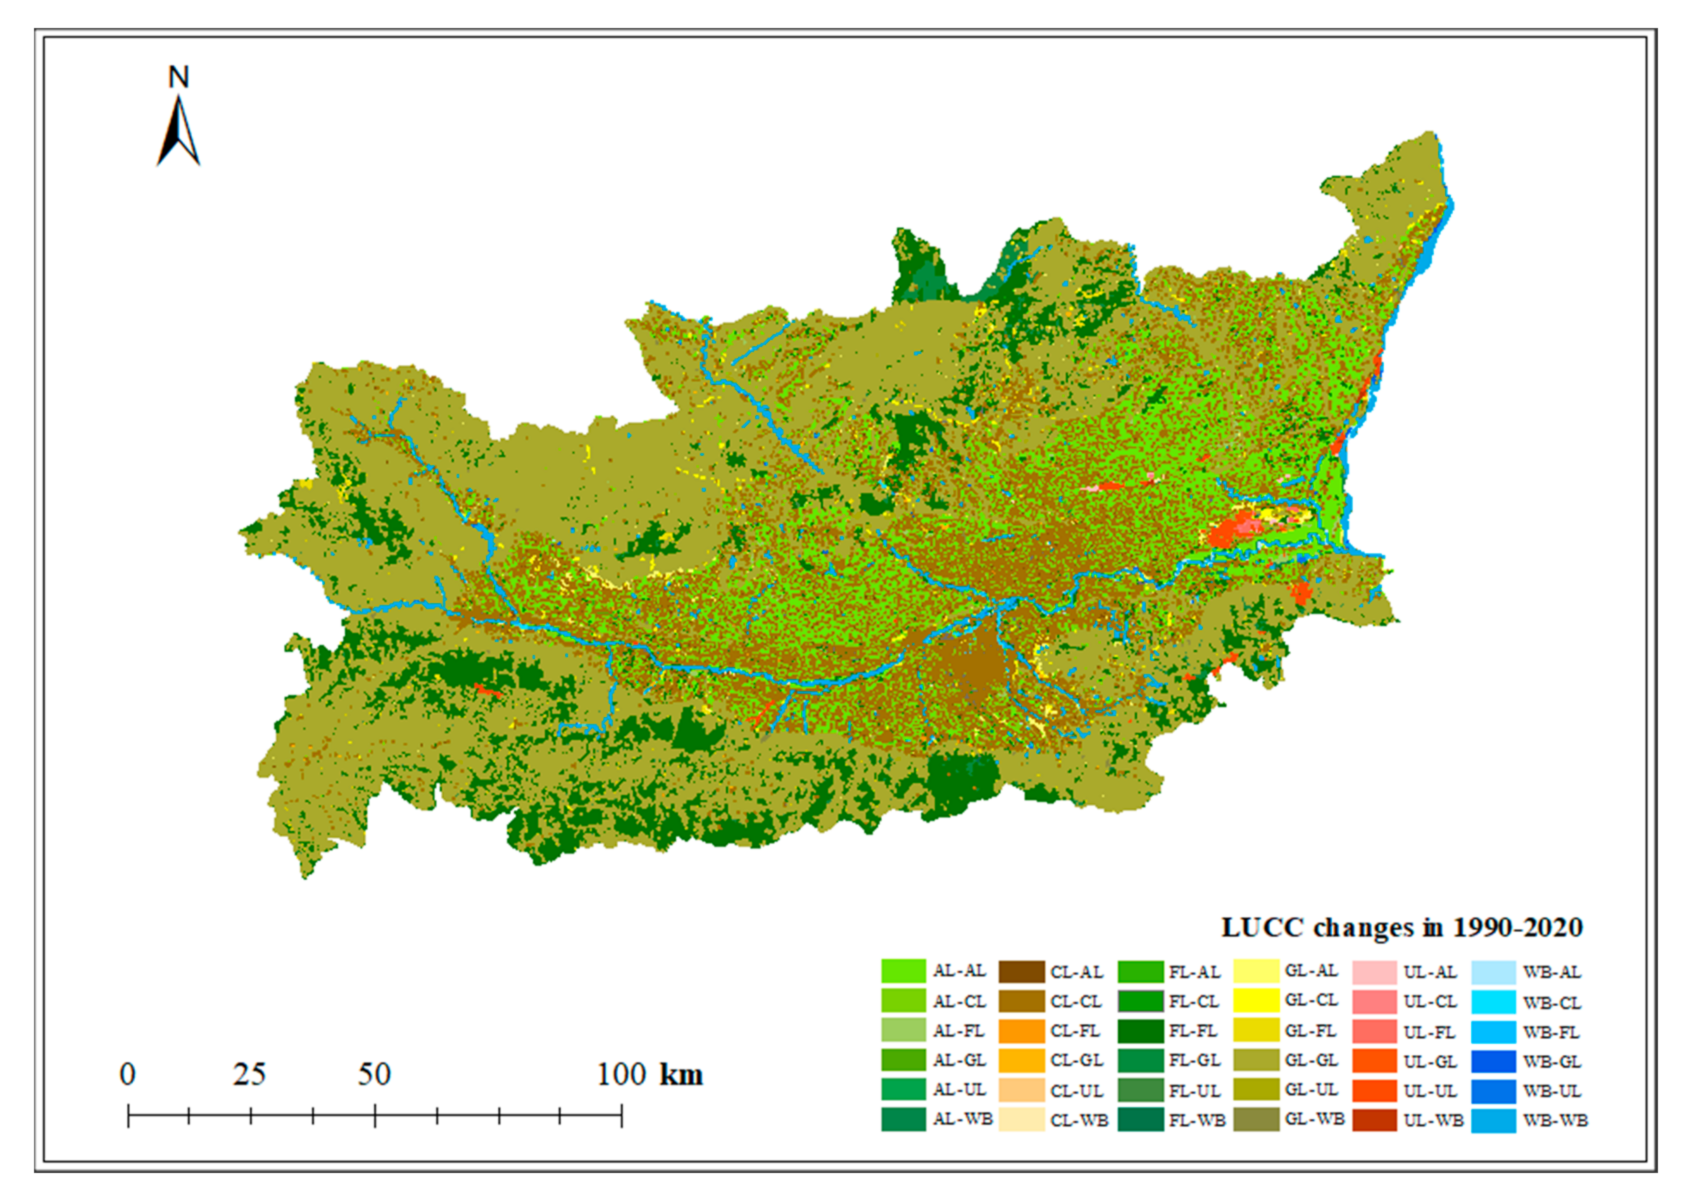 Sustainability | Free Full-Text | Impacts and Projections of Land Use and  Demographic Changes on Ecosystem Services: A Case Study in the Guanzhong  Region, China | HTML